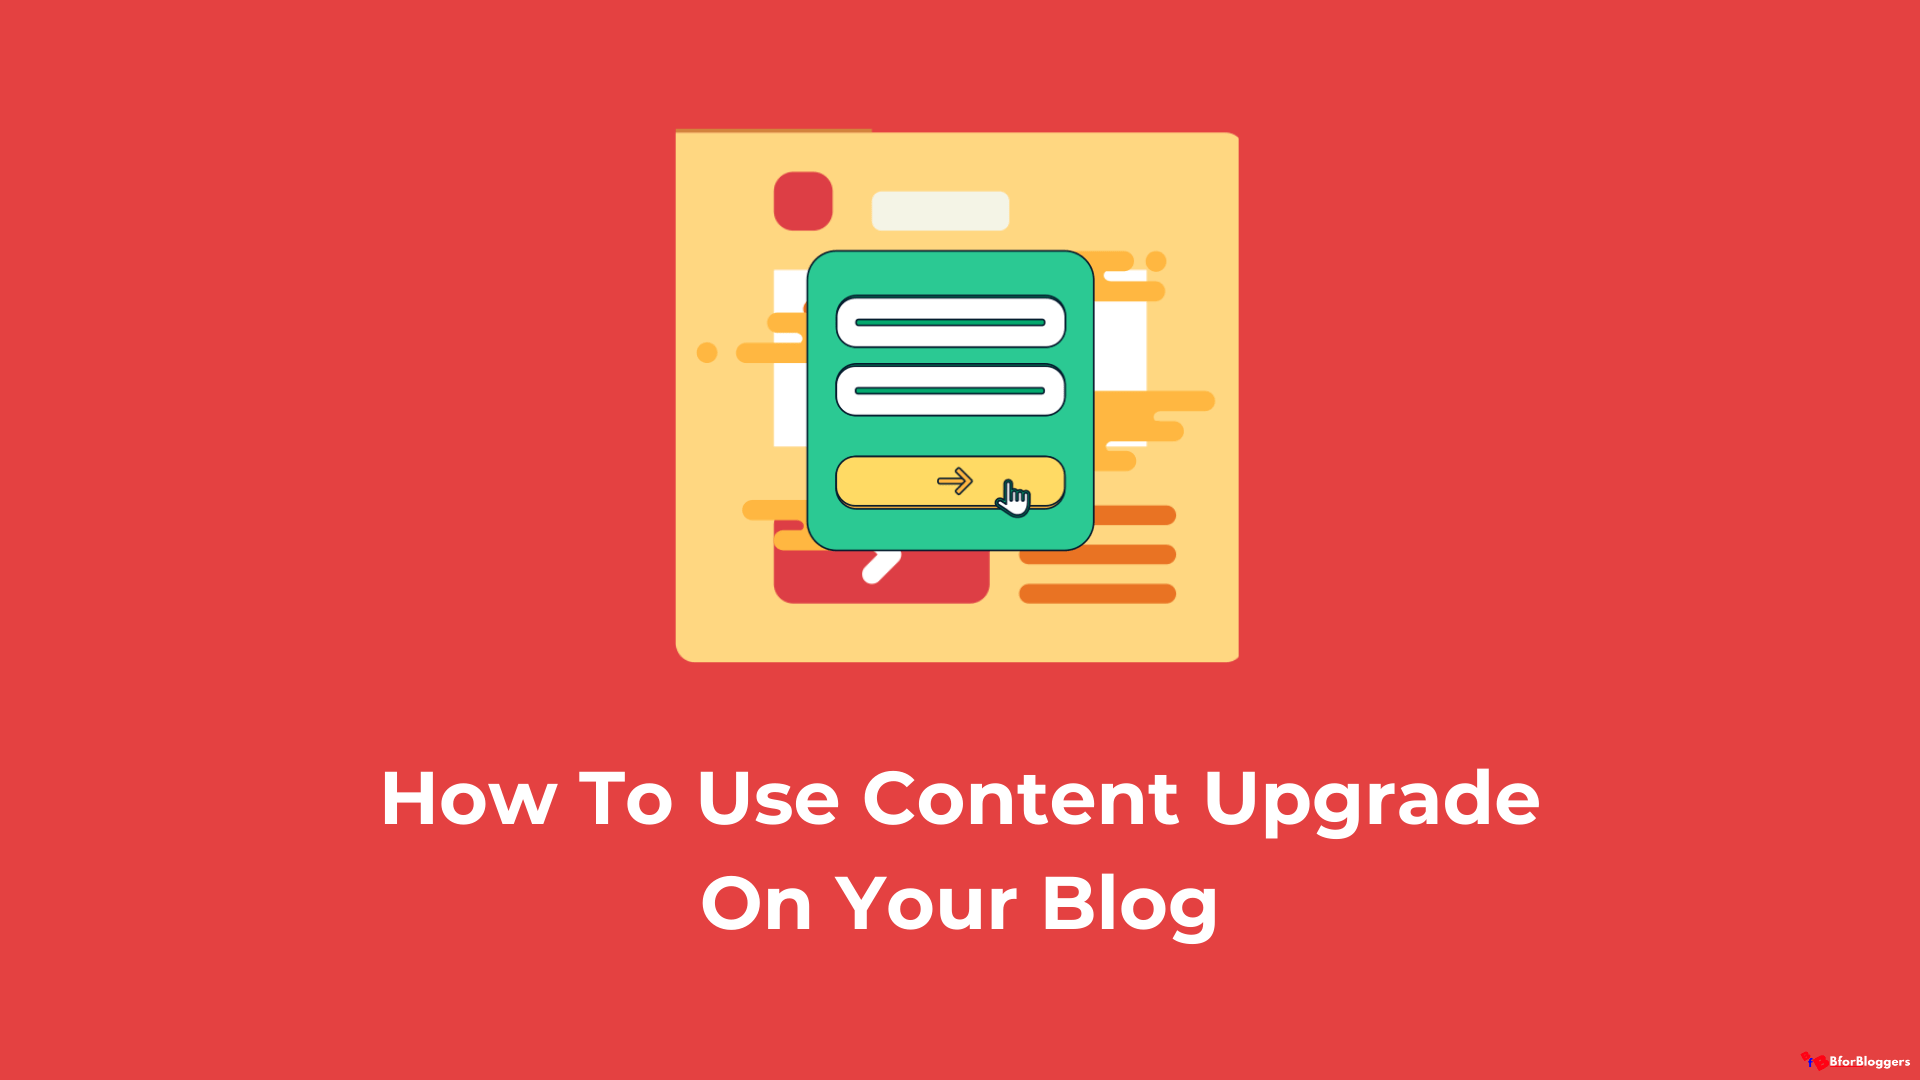 How to Use Content Upgrade On Your Blog & Build Your Email List